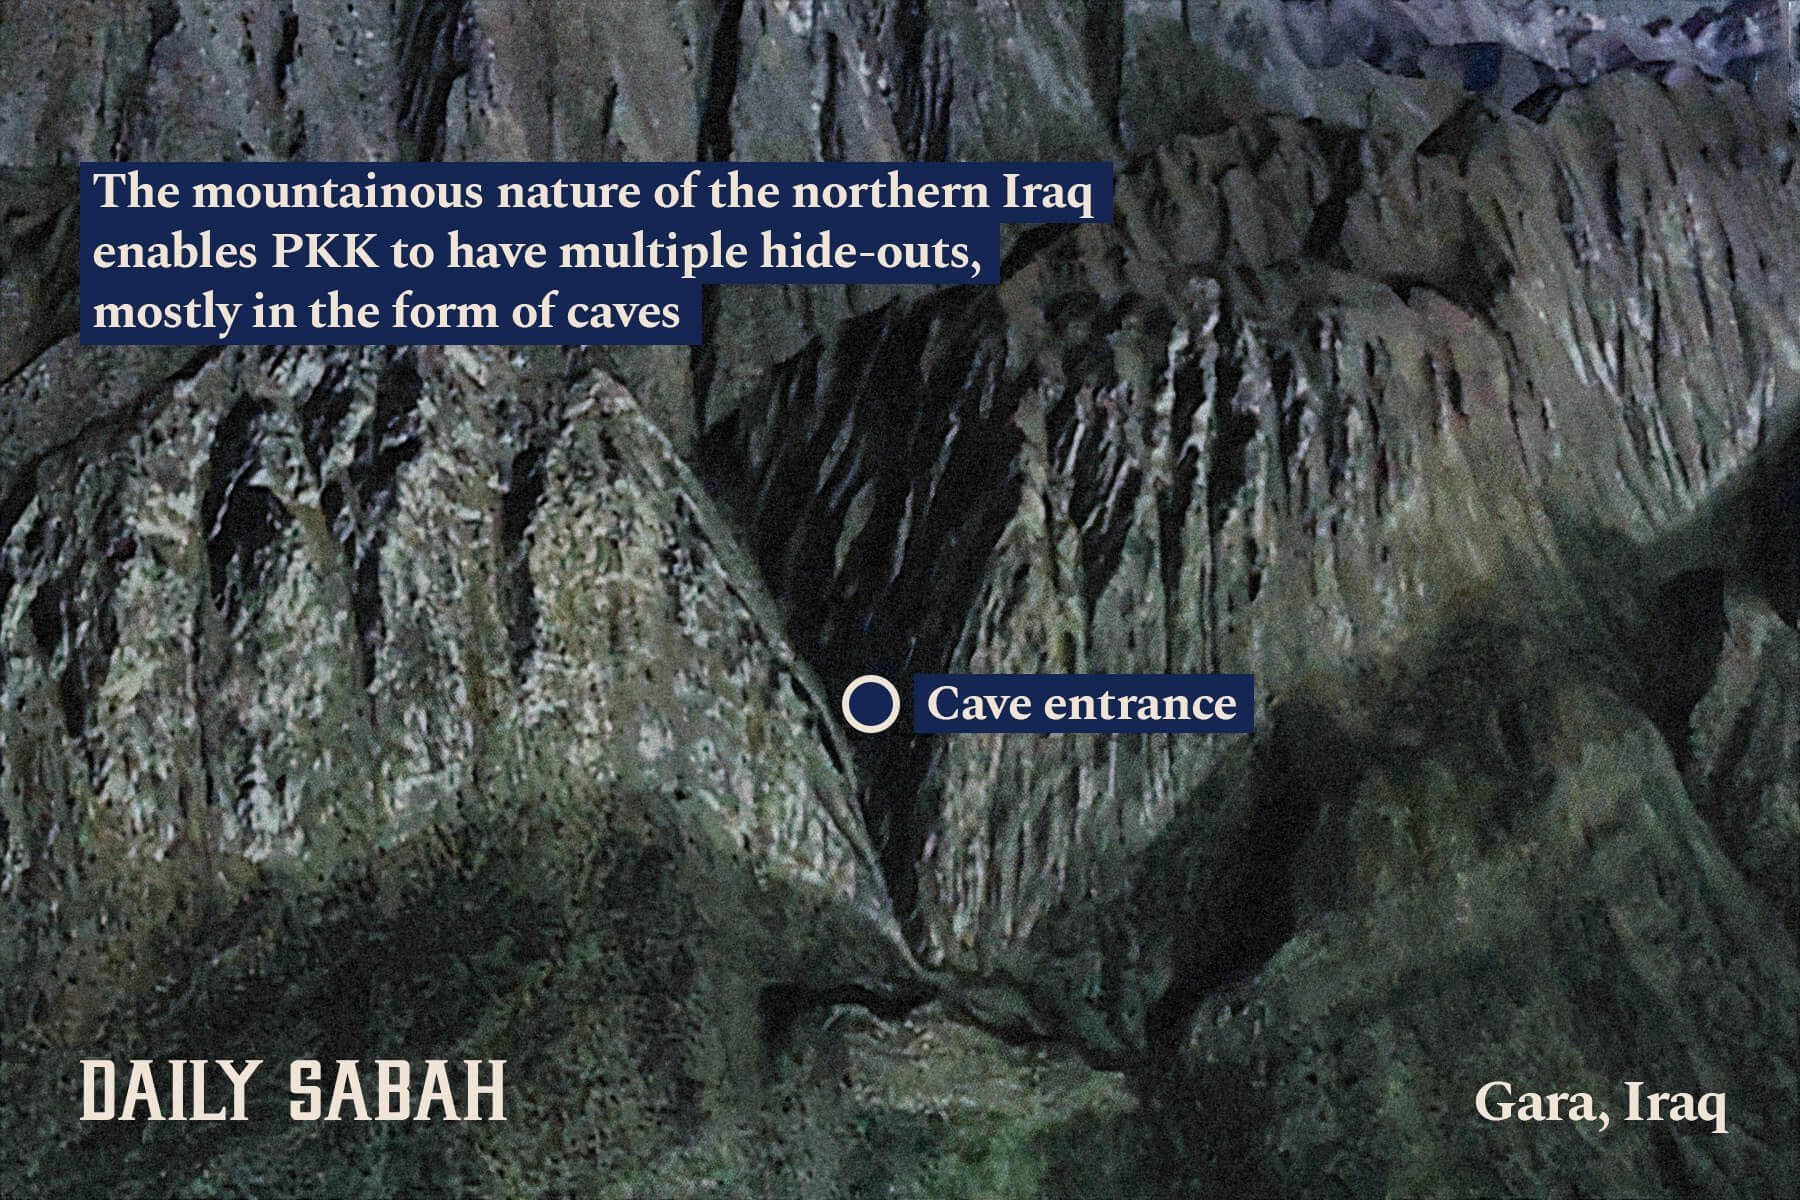 The mountainous area in northern Iraq's Gara region in which caves used by PKK terrorists were found is seen in this photo made public by the Turkish military on Feb. 14, 2021.